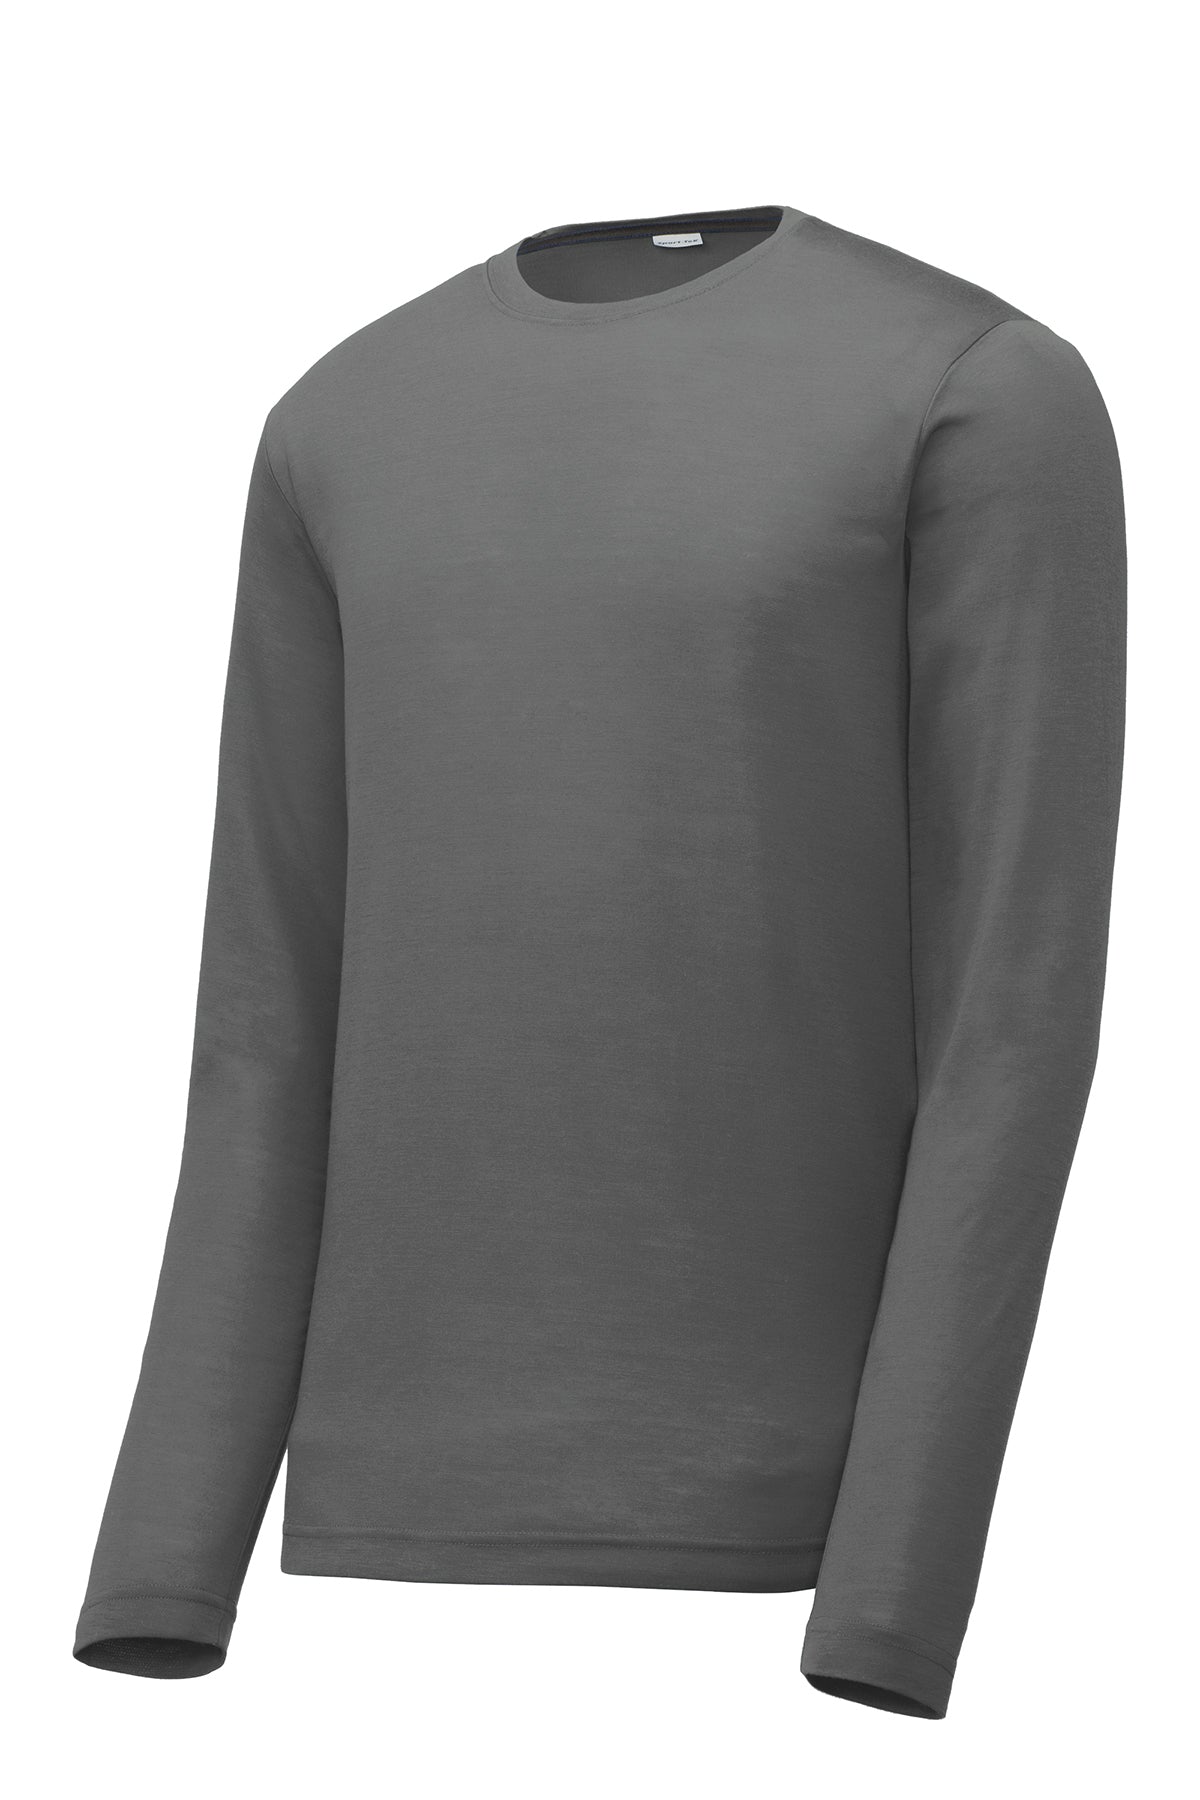 ST450LS Sport-Tek® Long Sleeve PosiCharge® Competitor™ Cotton Touch™ Tee